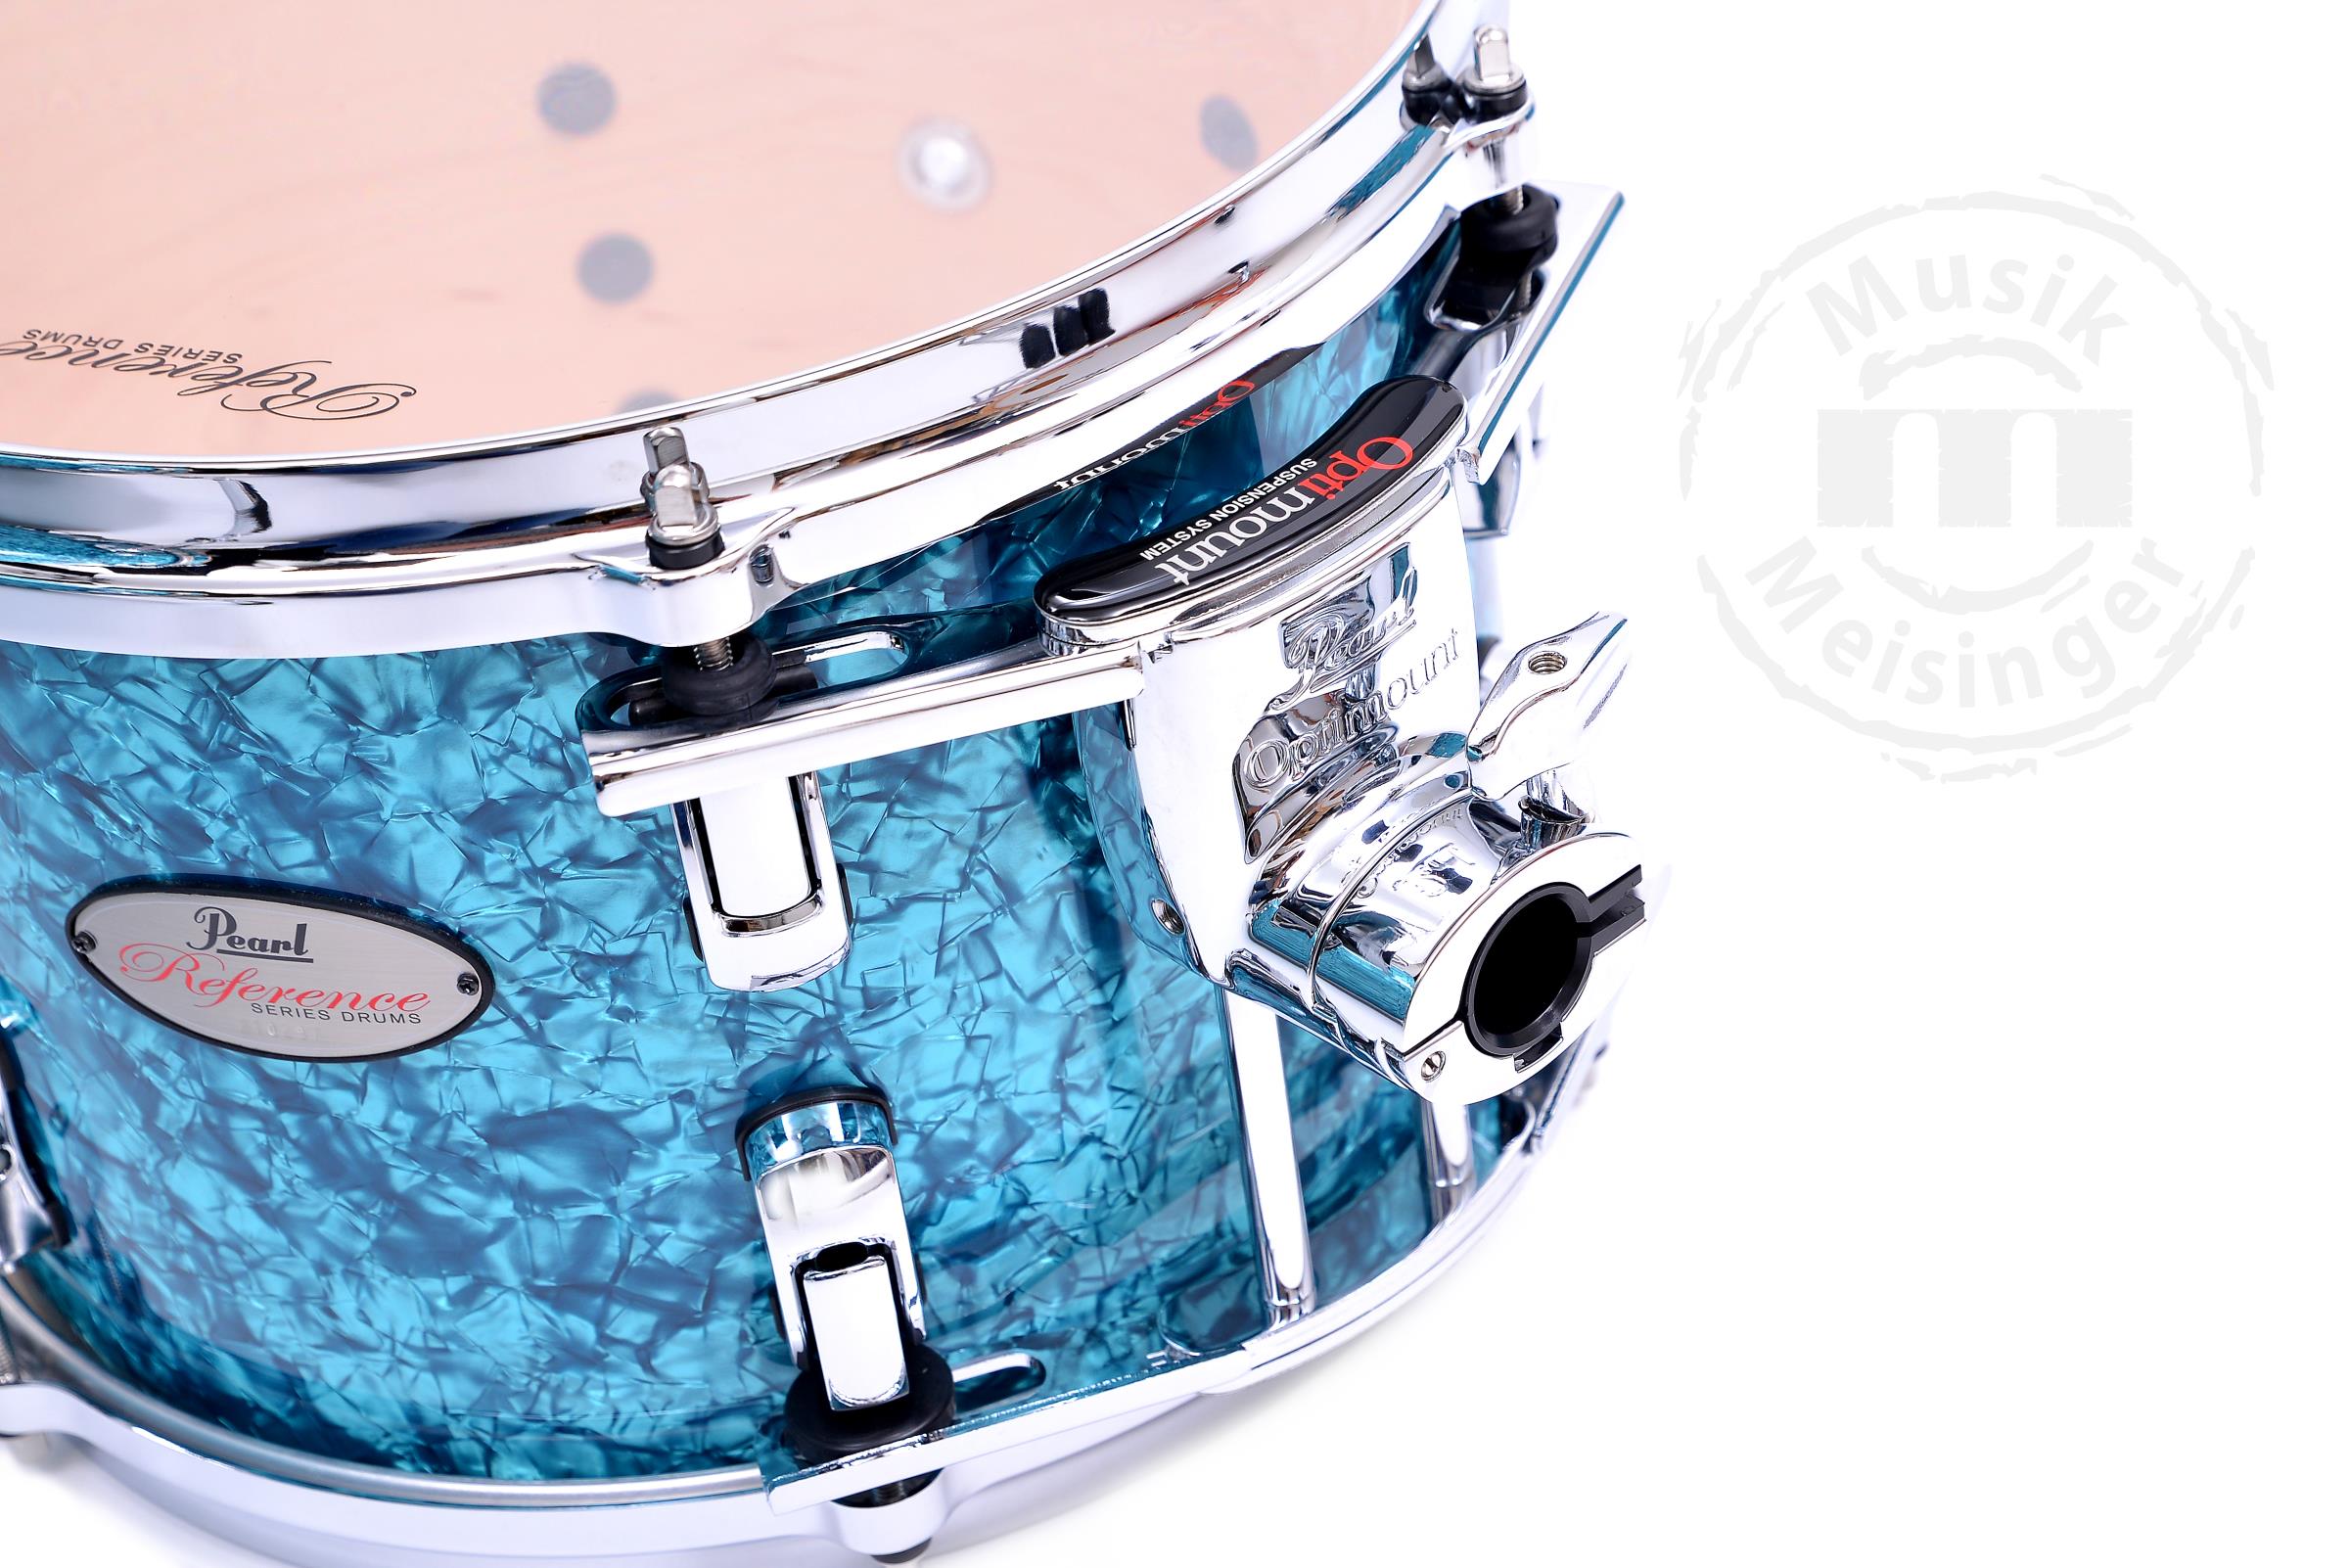 Pearl Reference 22B/10T/12T/16FT Turquoise Pearl